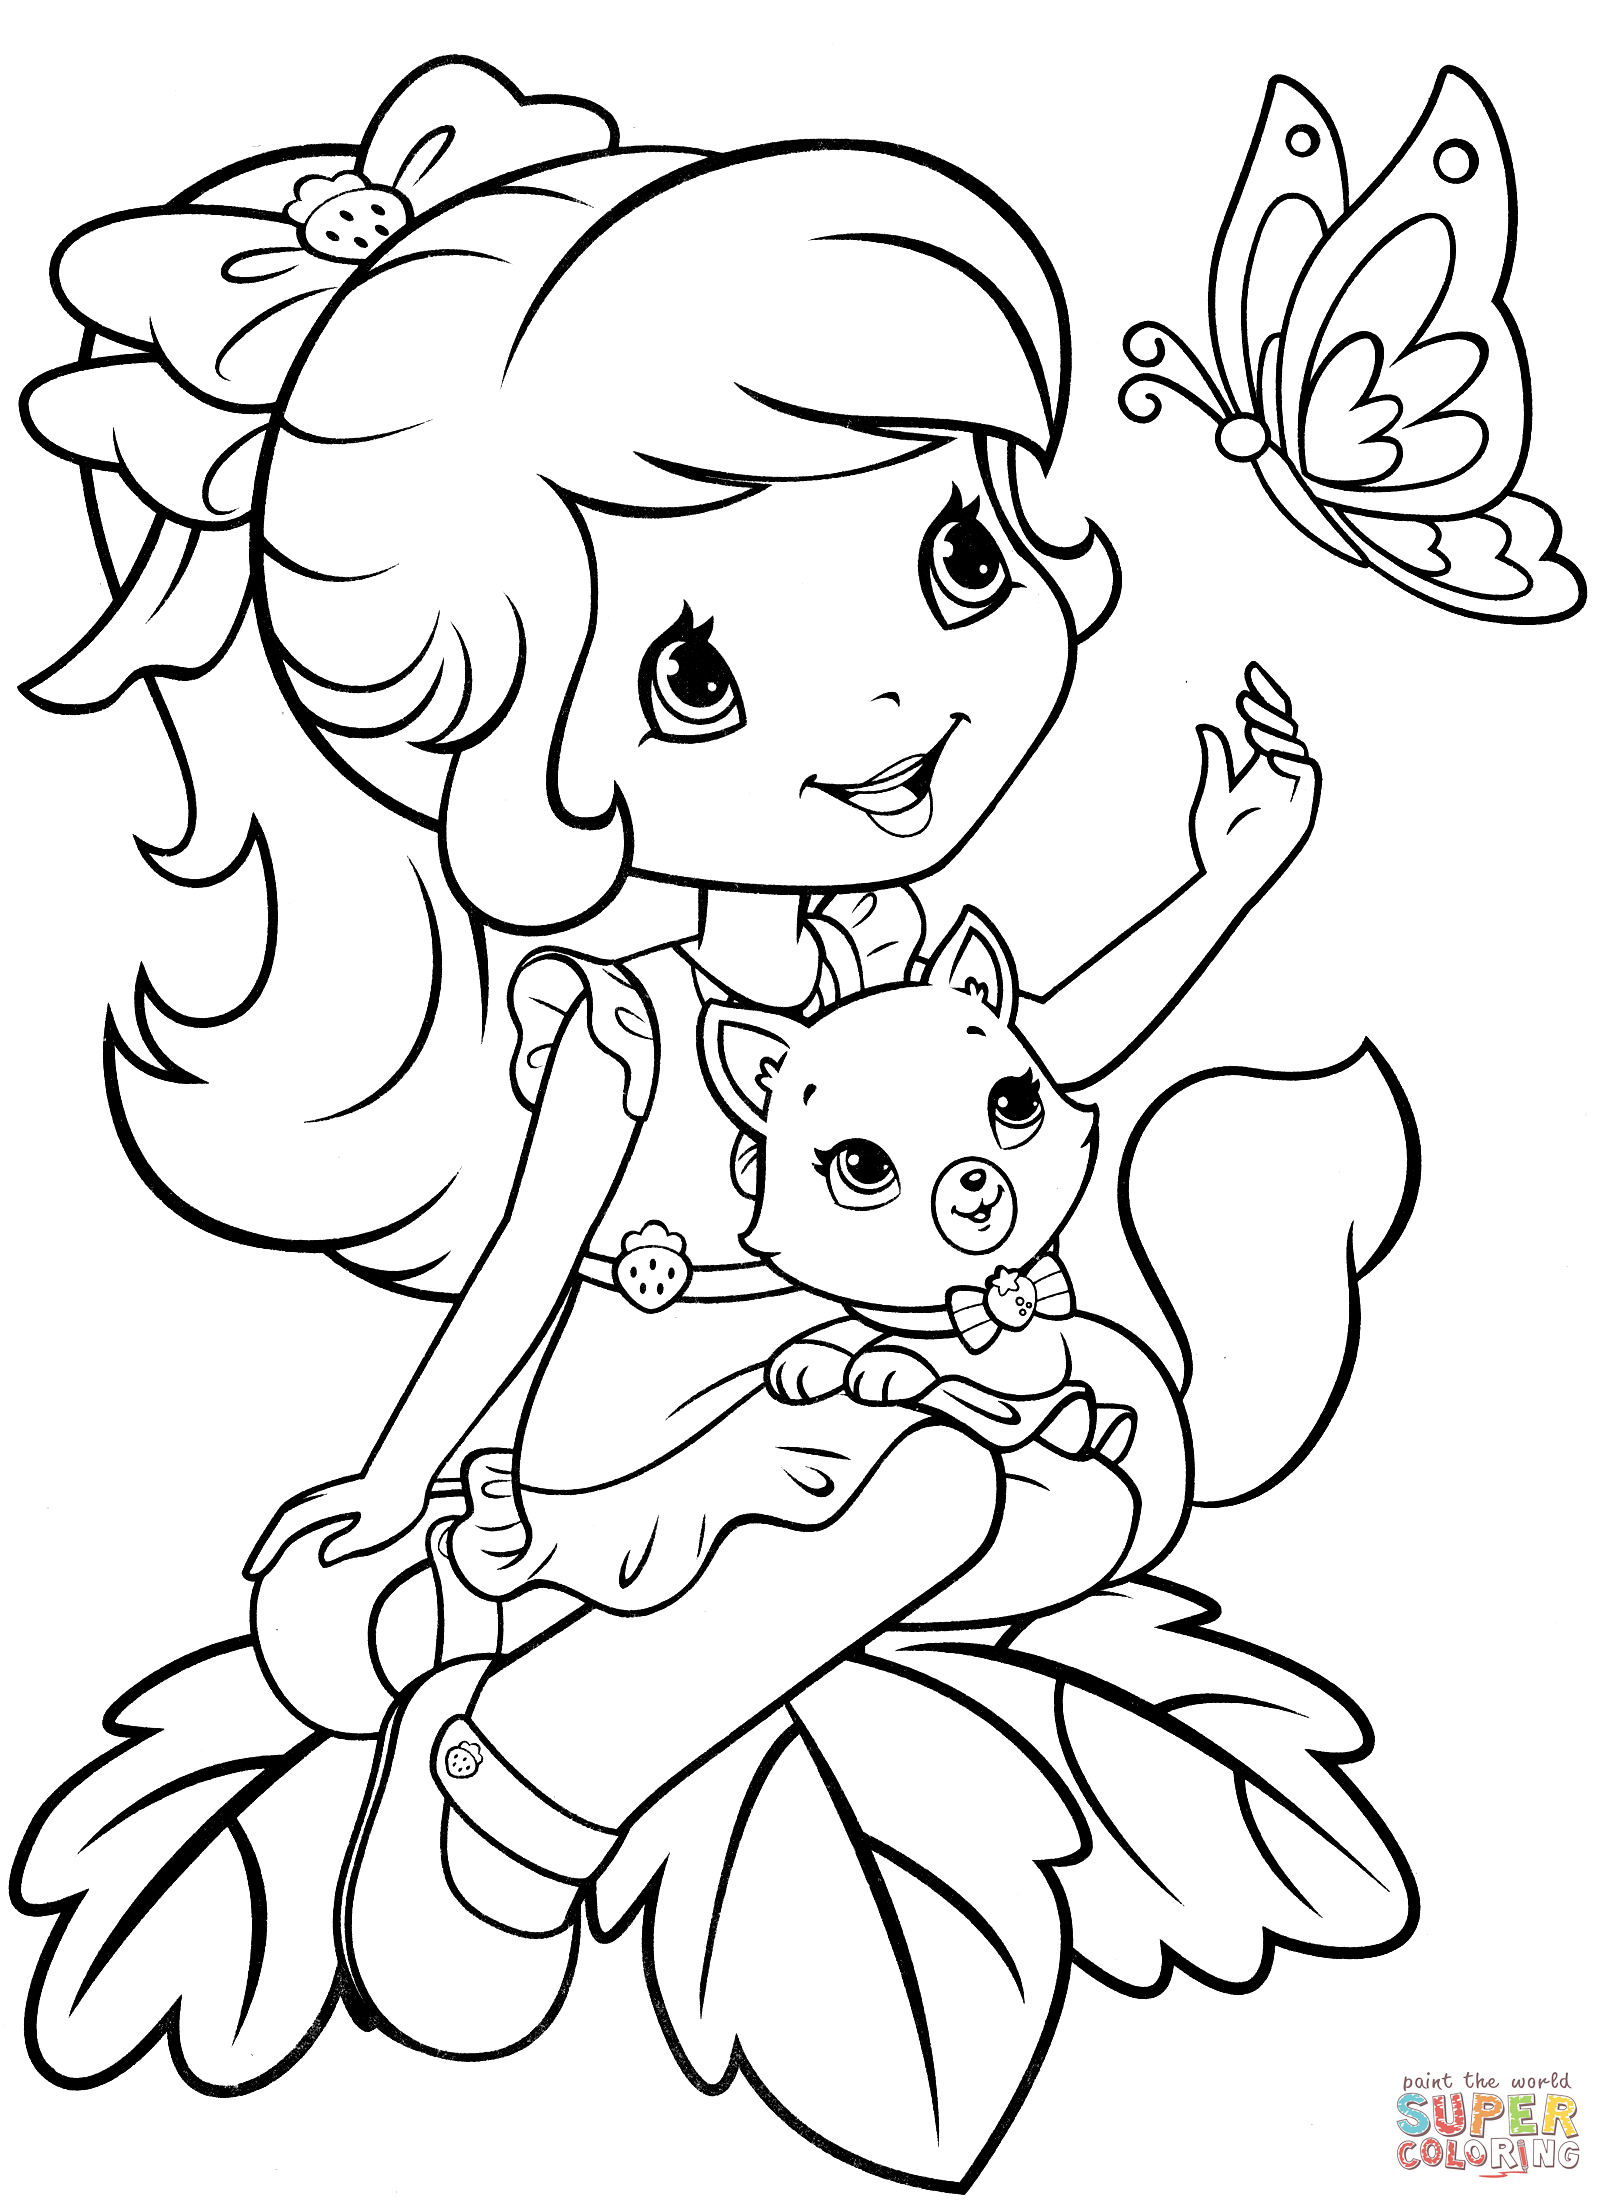 Strawberry Shortcake Coloring Pages | Free Coloring Pages - Strawberry Shortcake Coloring Pages Free Printable